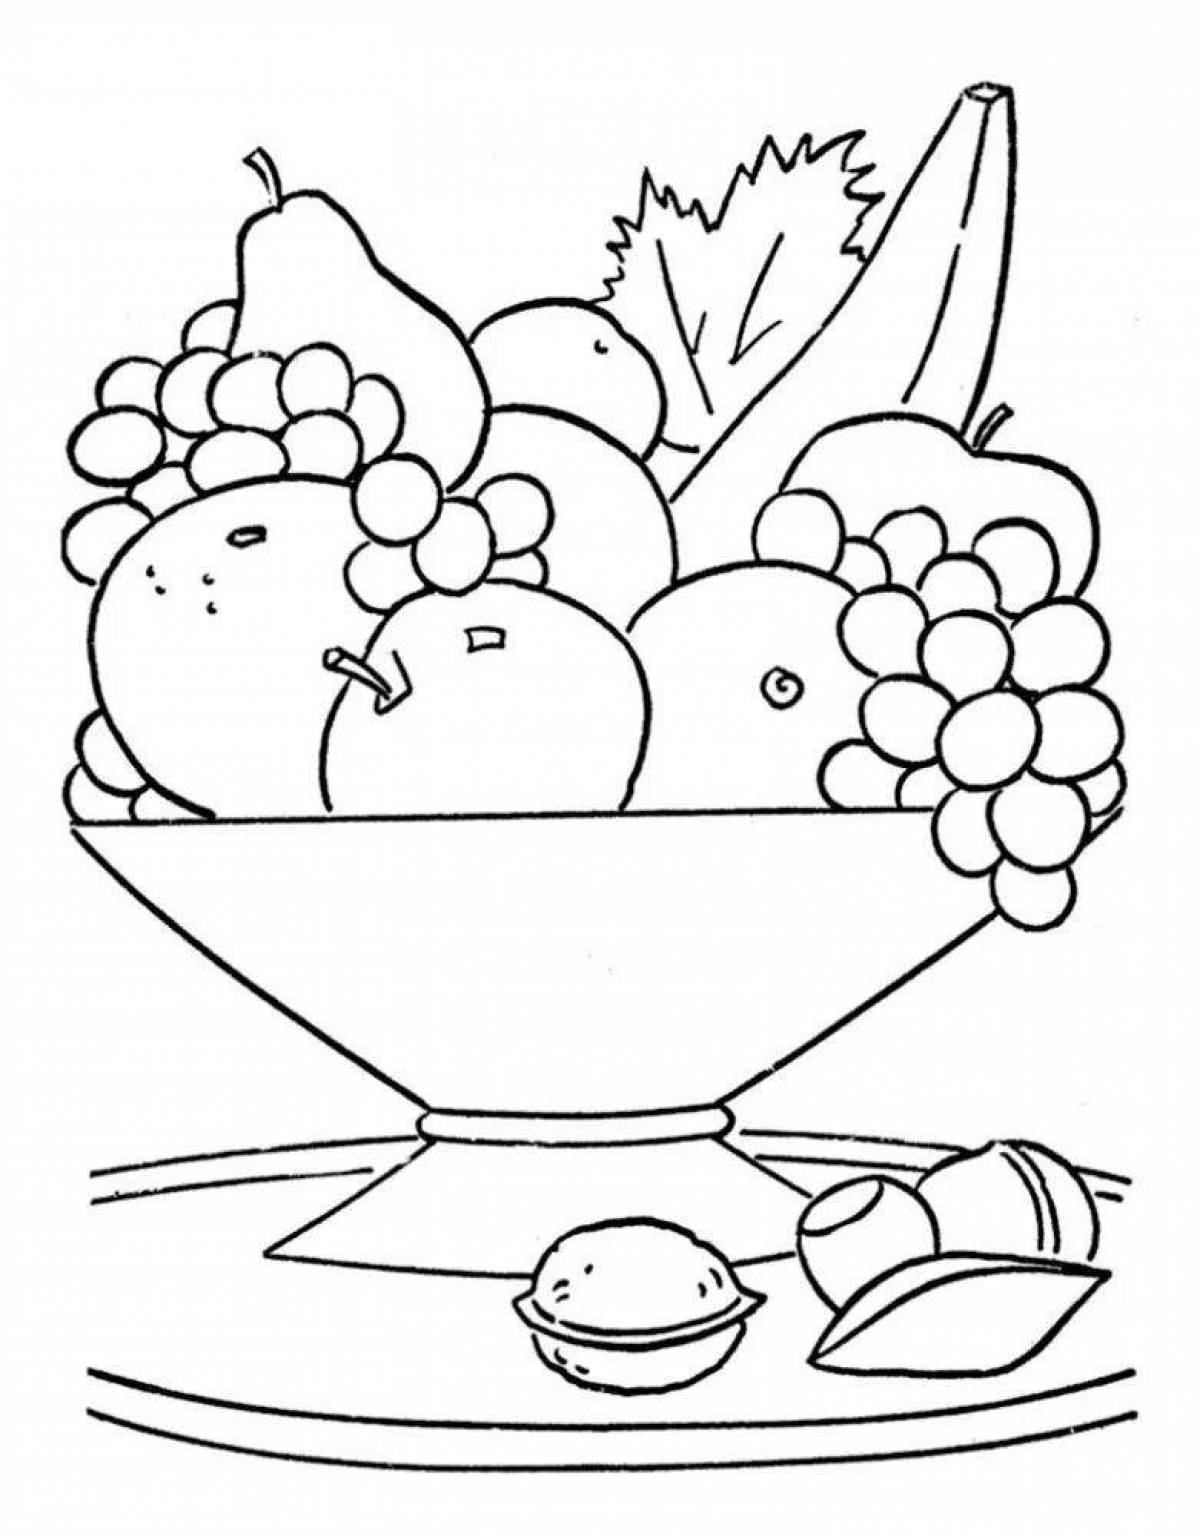 Cheerful still life of vegetables and fruits for preschoolers